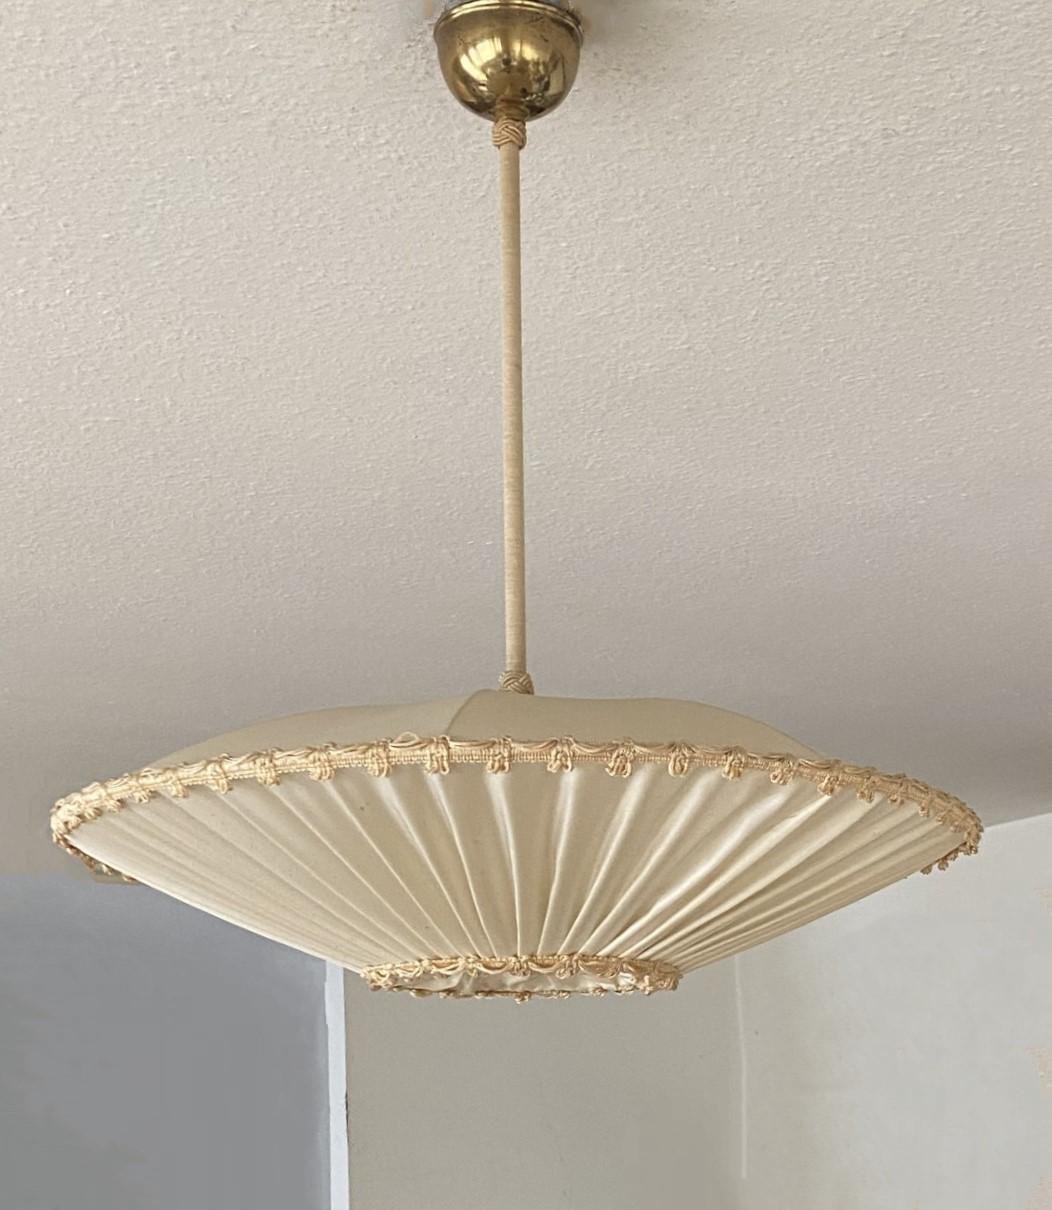 Rare beautiful Scandinavian design ceiling light manufactured in Sweden, 1930-1840s. Large hand-made silk shade with brass details. In good vintage condition, minor patina consistent with age and use, rewired. This pendant takes one E27 screw base